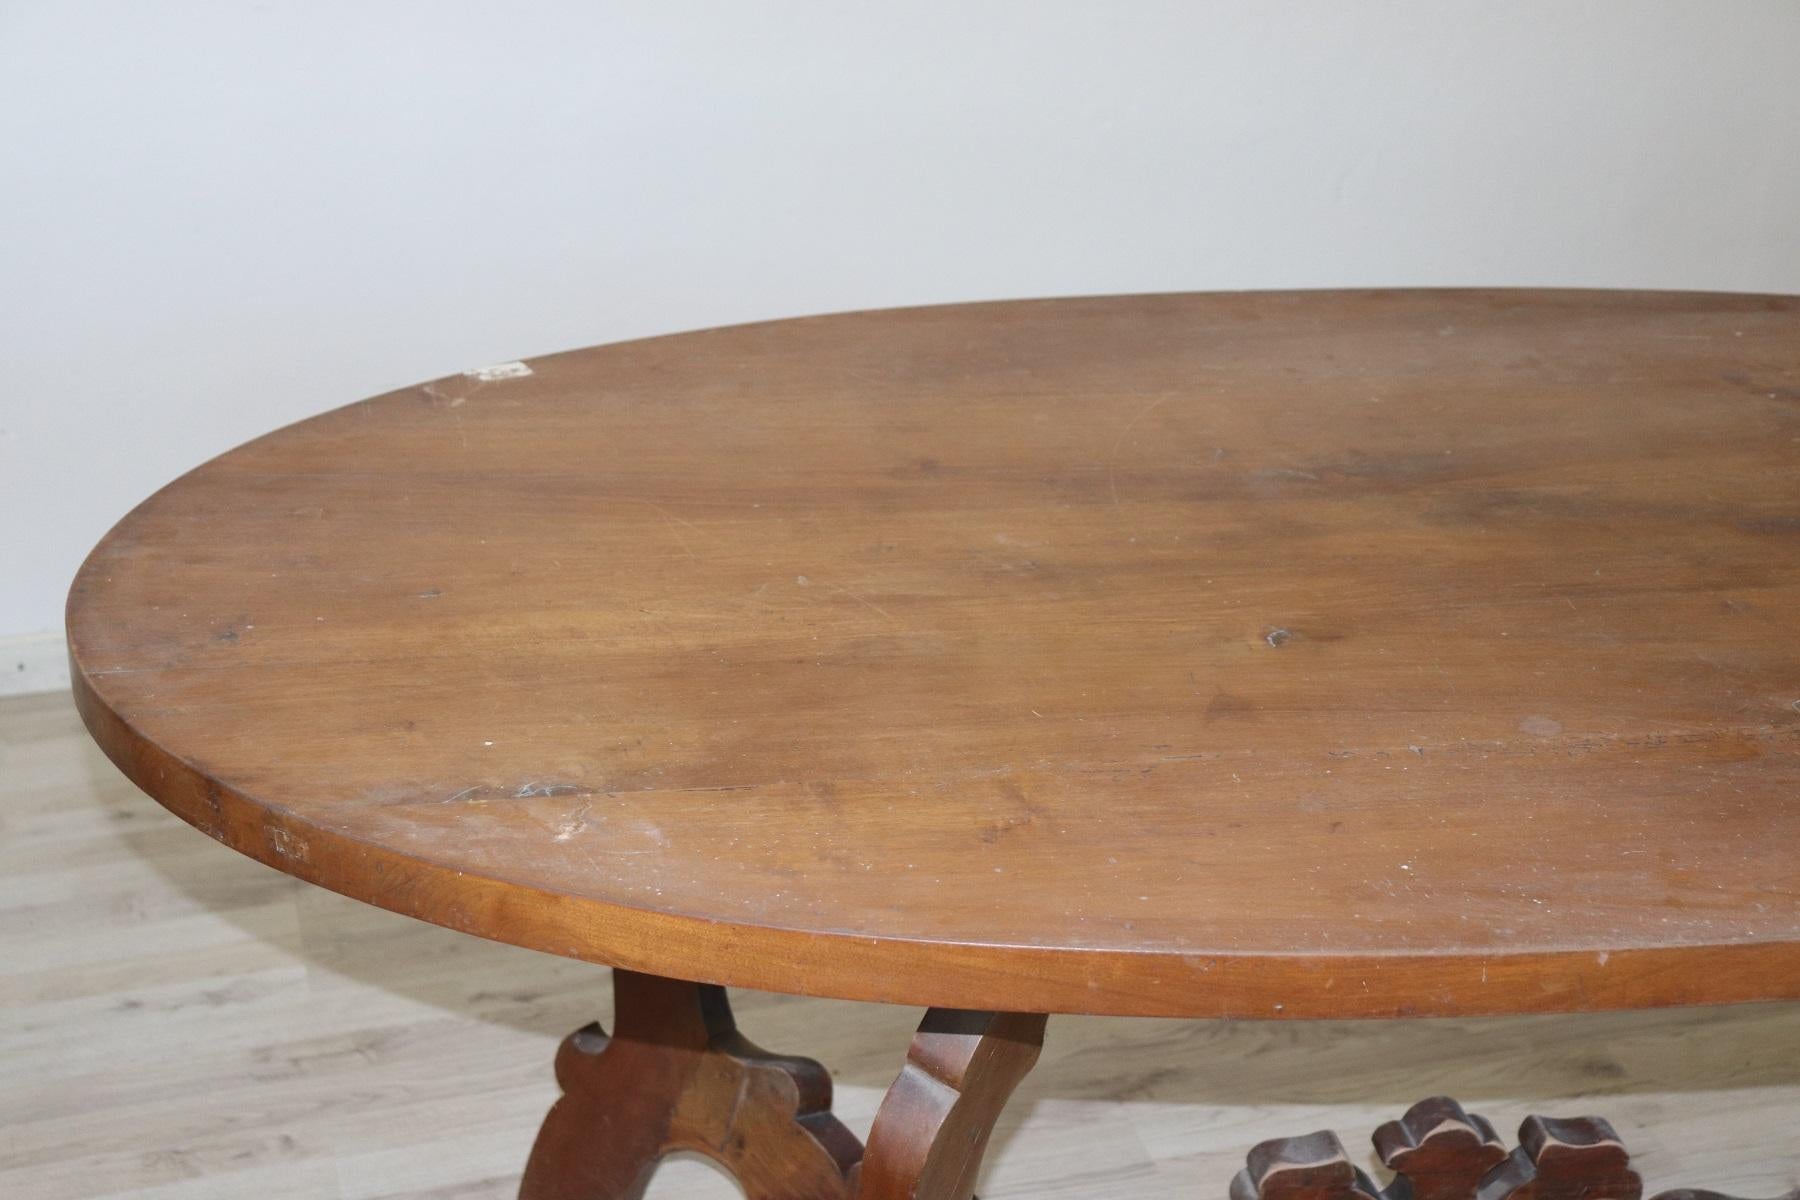 20th Century Italian Fratino Walnut Wood Oval Table with Lyre-Shaped Legs 3